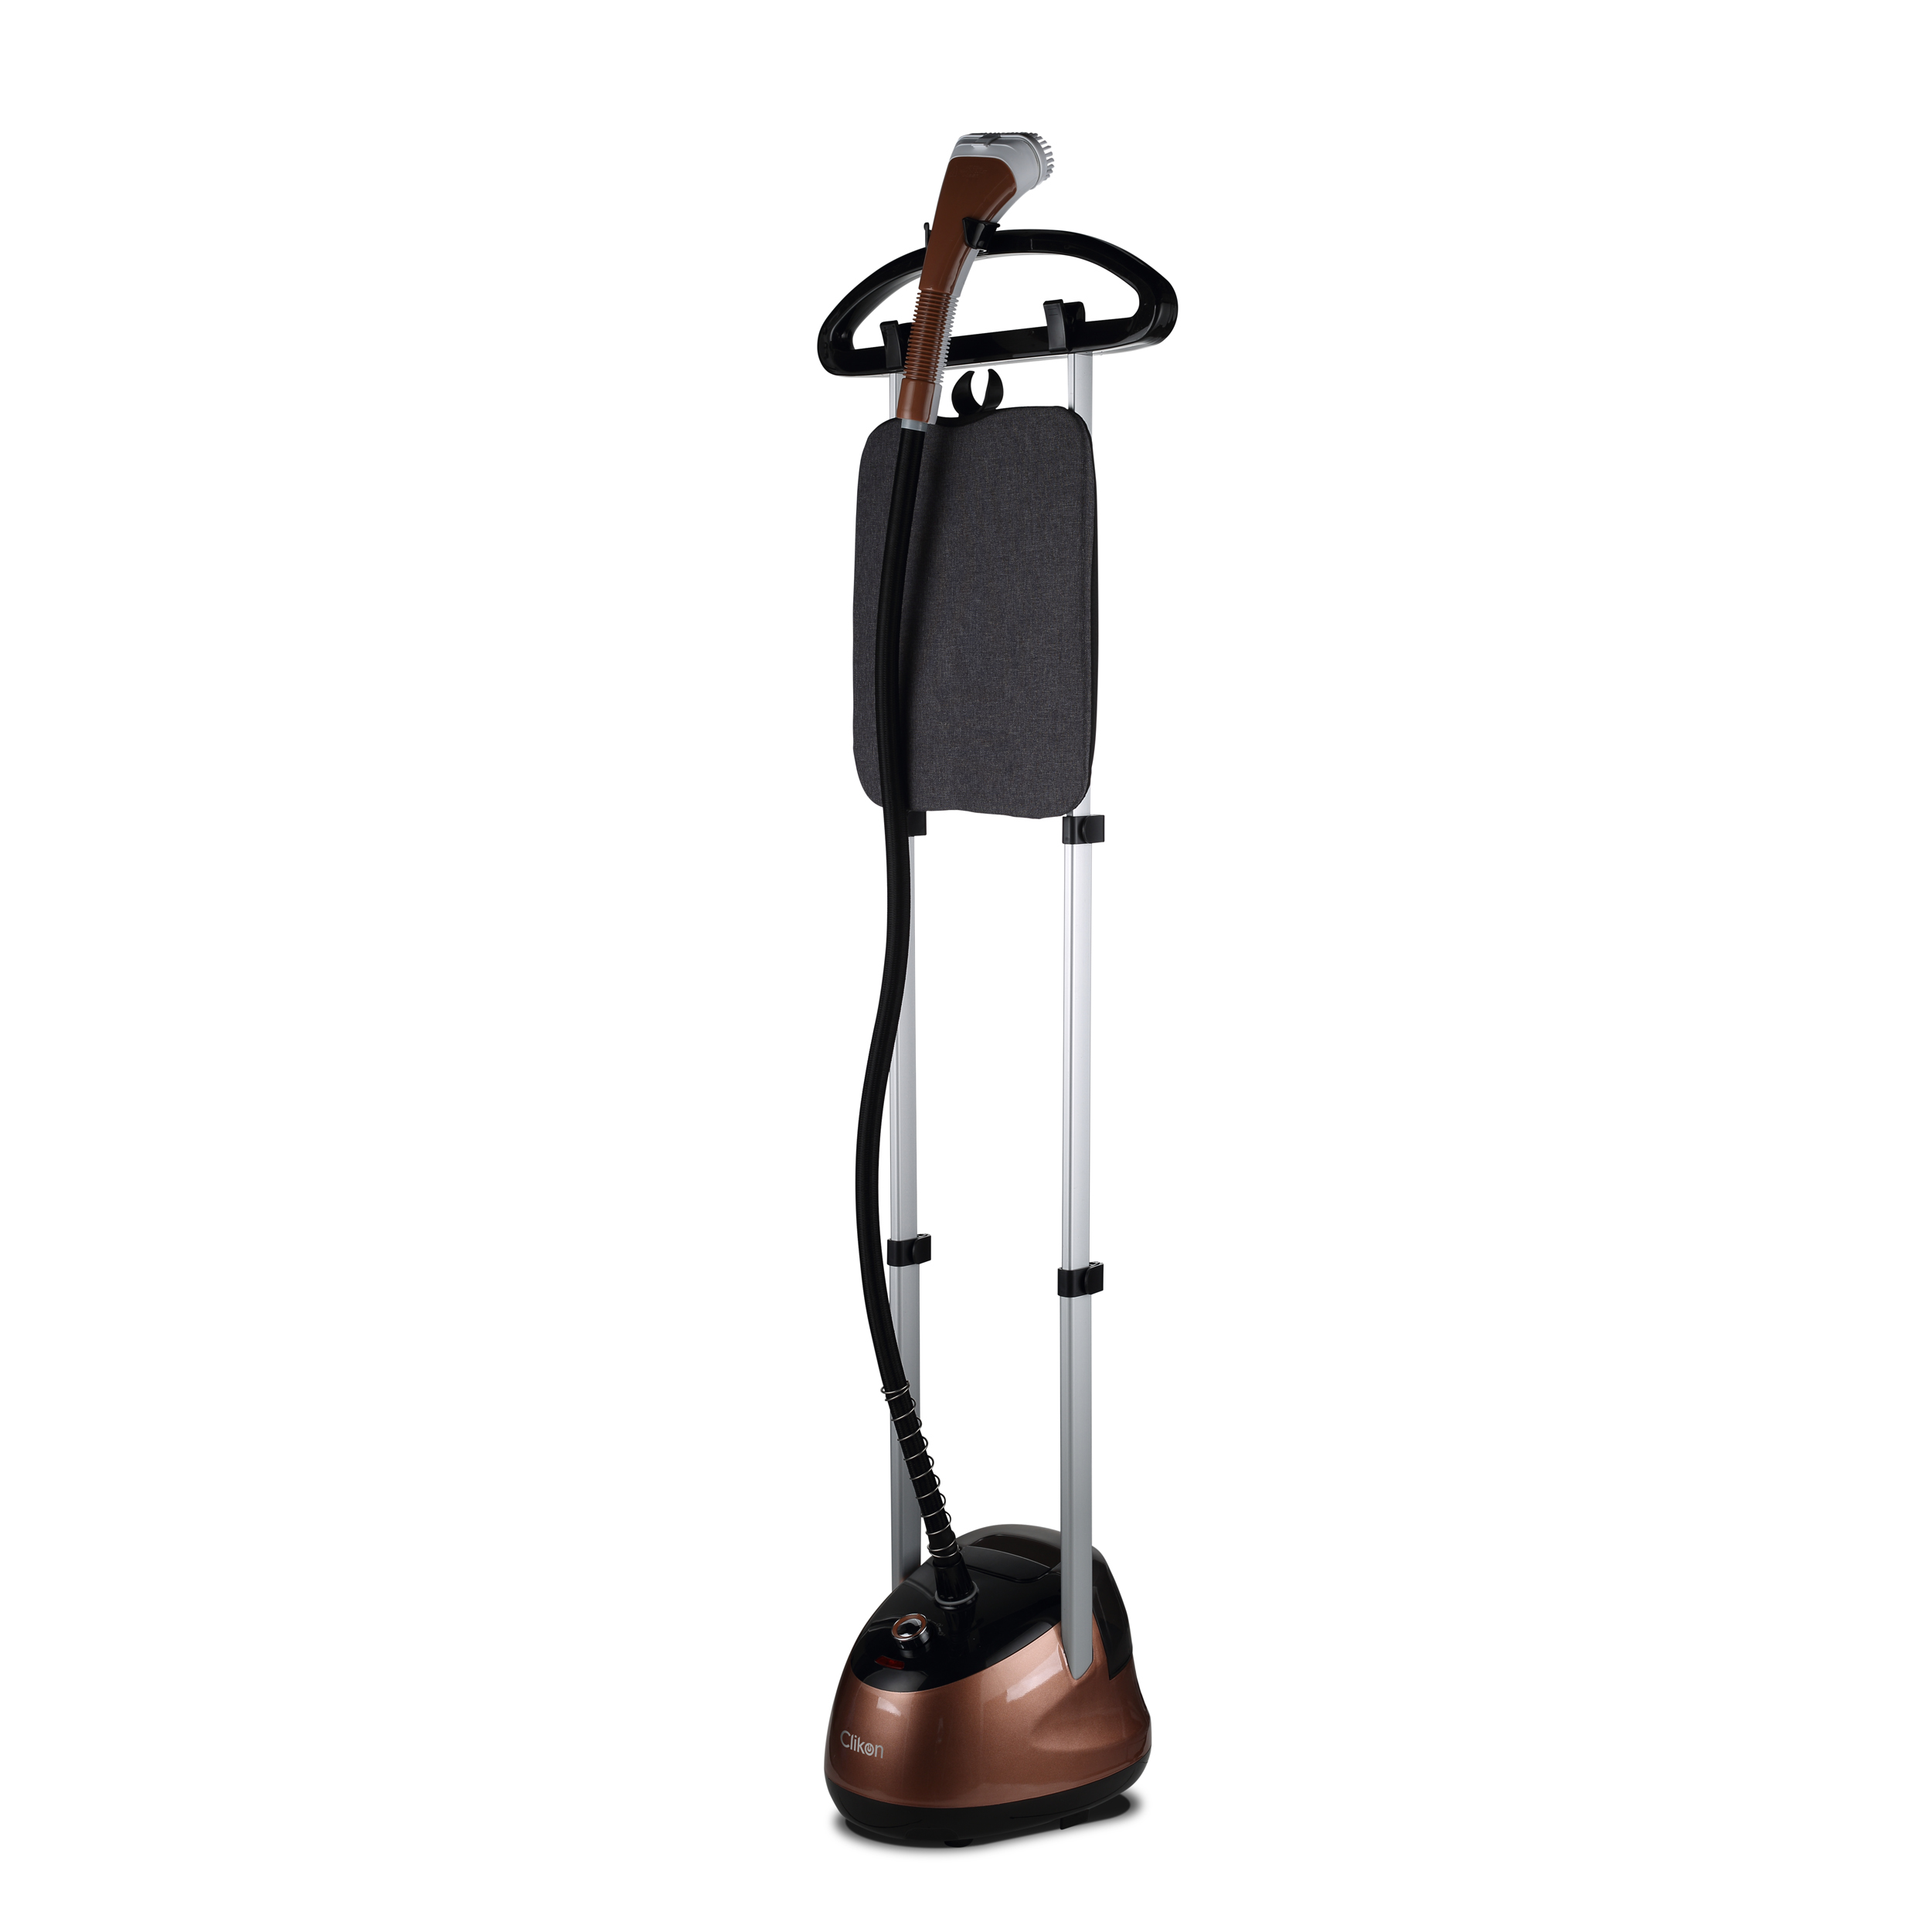 Clikon Garment Steamer-2000W with 2.2L Water Tank Capacity -CK4036